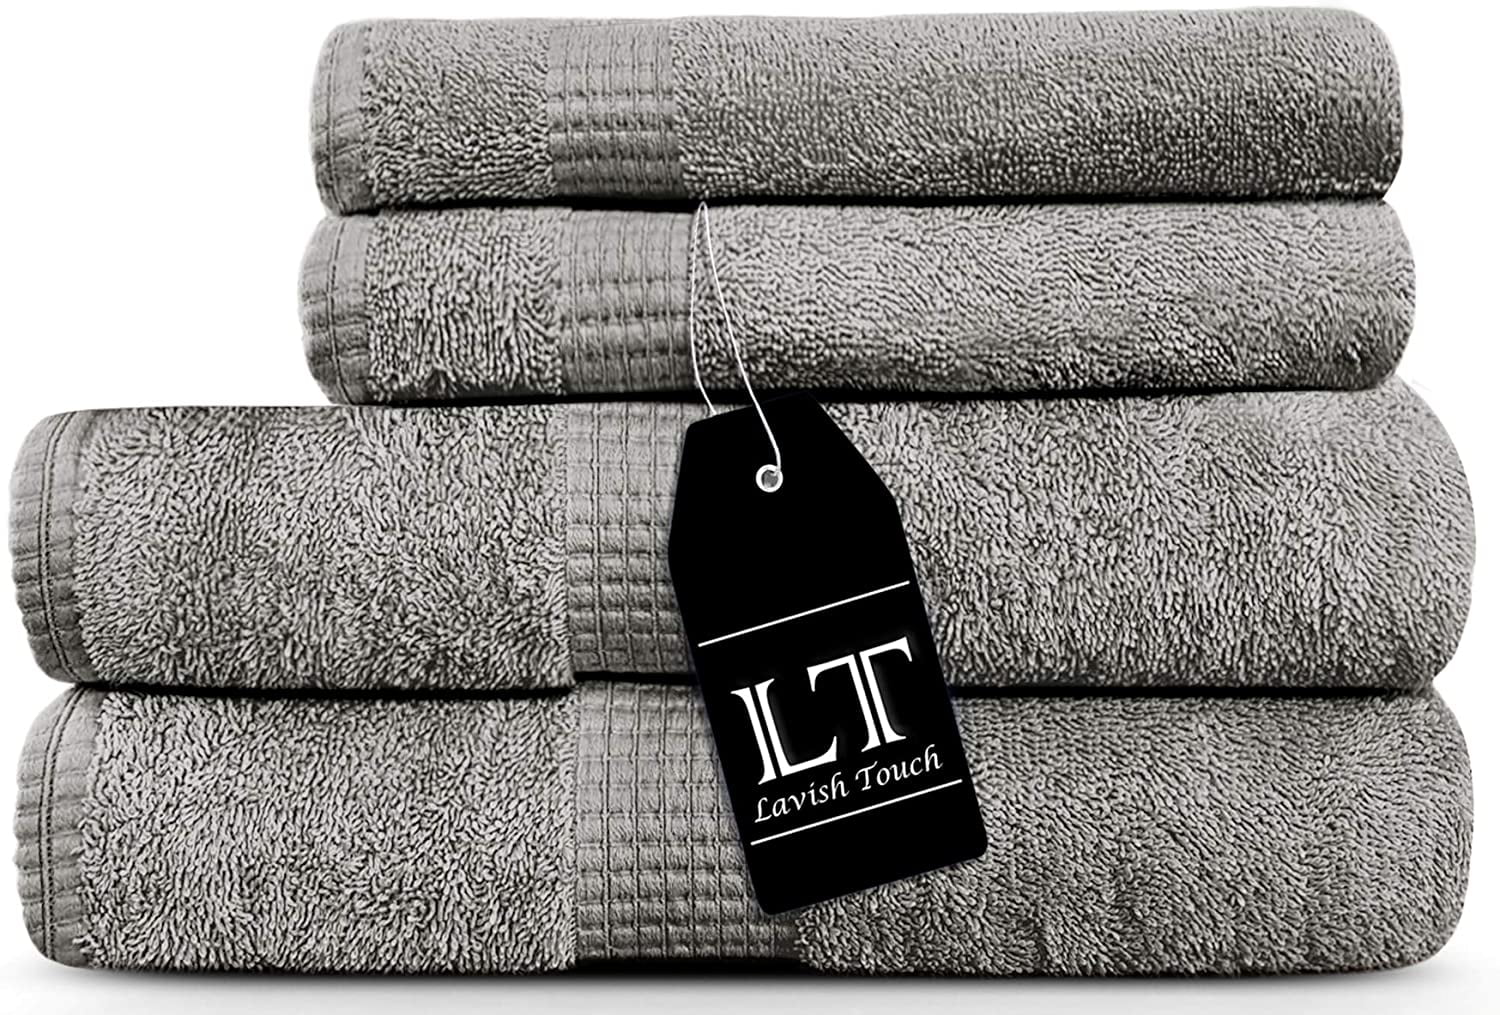 Walmart Gray Towels on Sale, UP TO 63% OFF | www.realliganaval.com